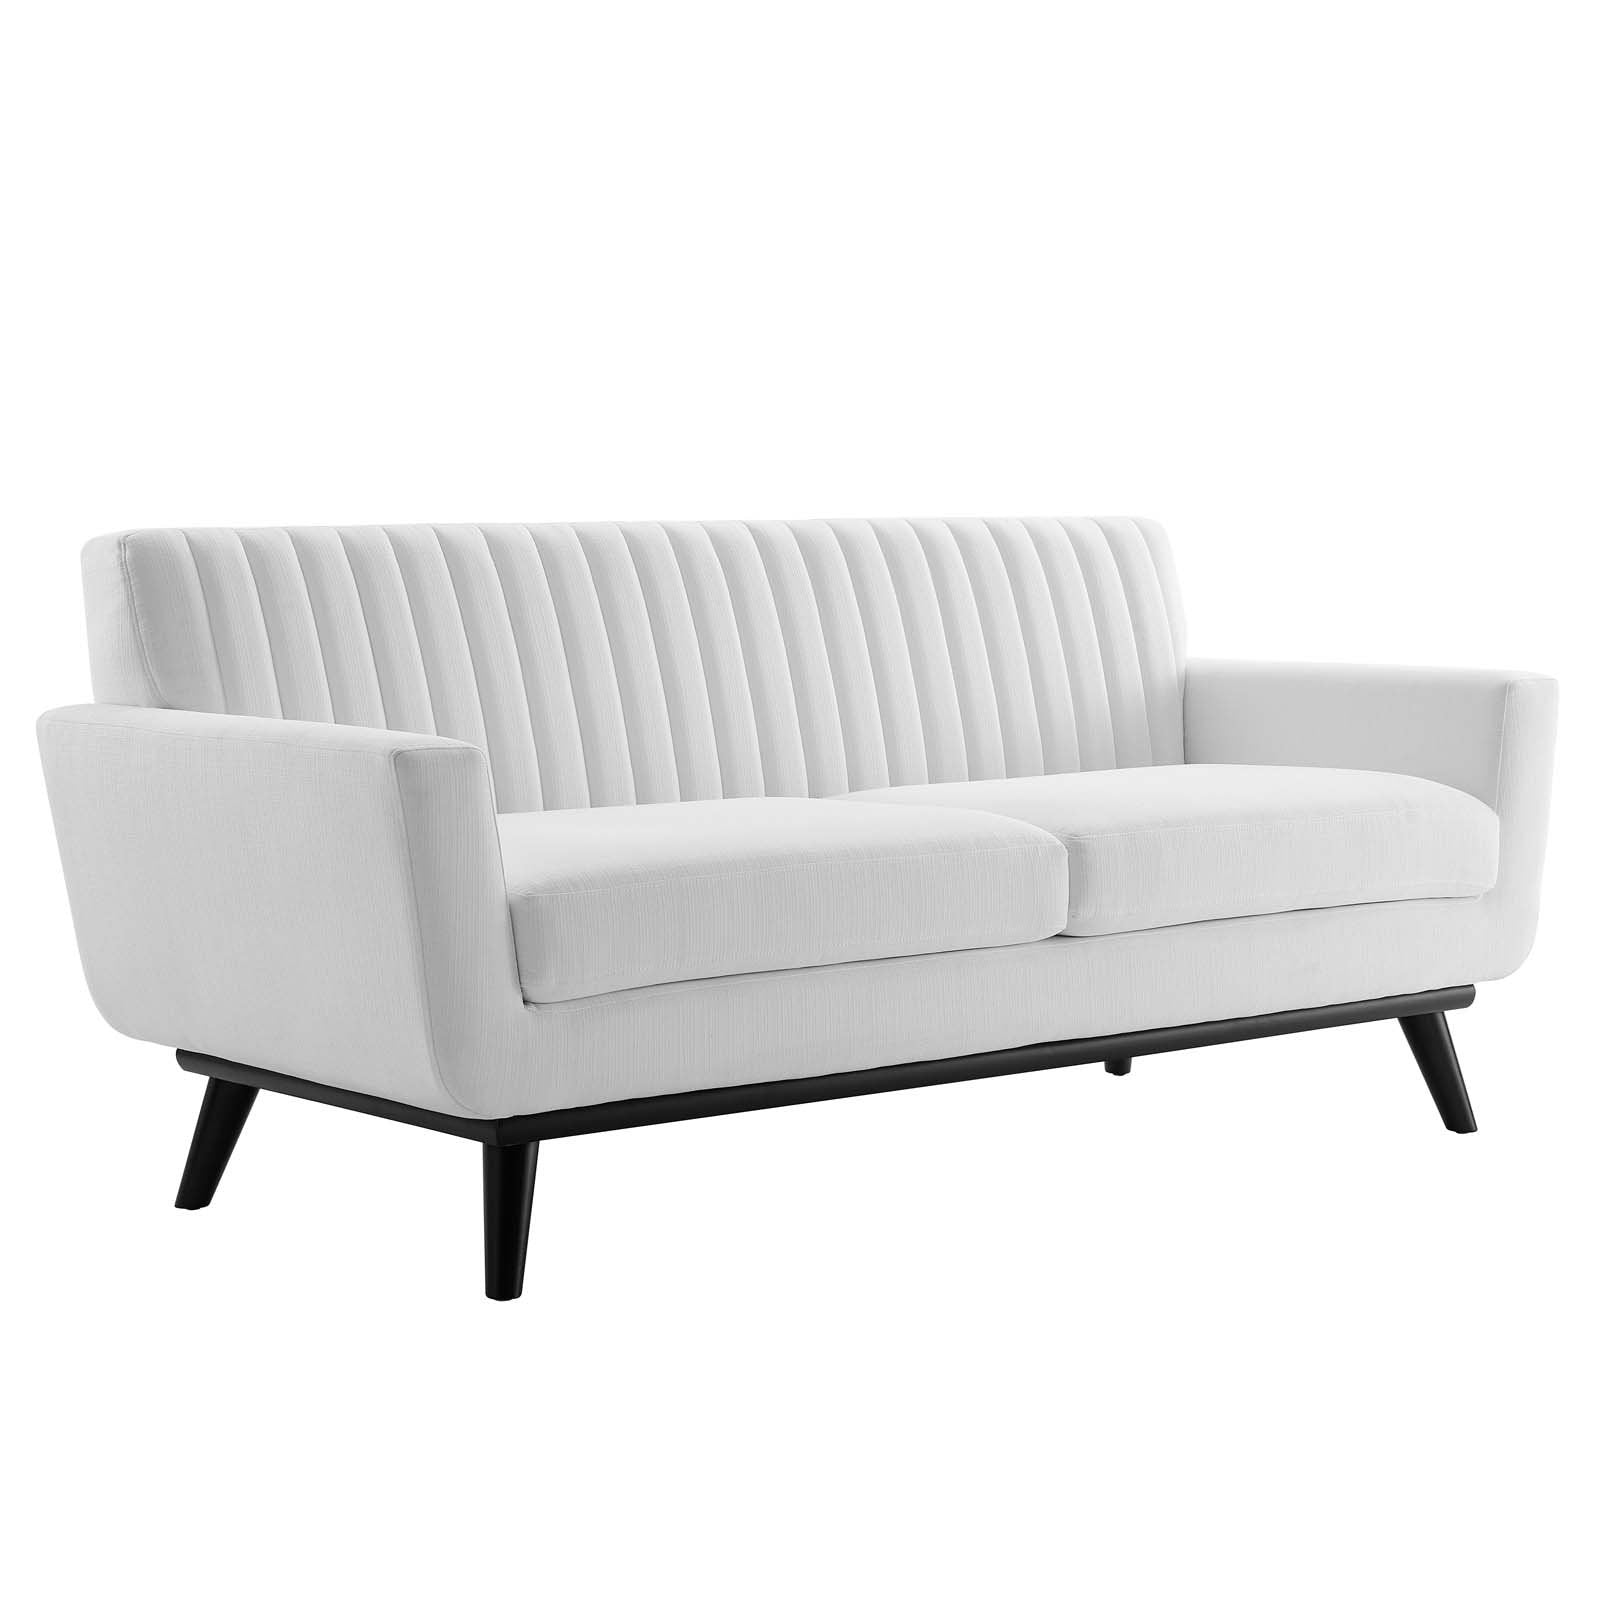 Engage Channel Tufted Fabric Loveseat - East Shore Modern Home Furnishings